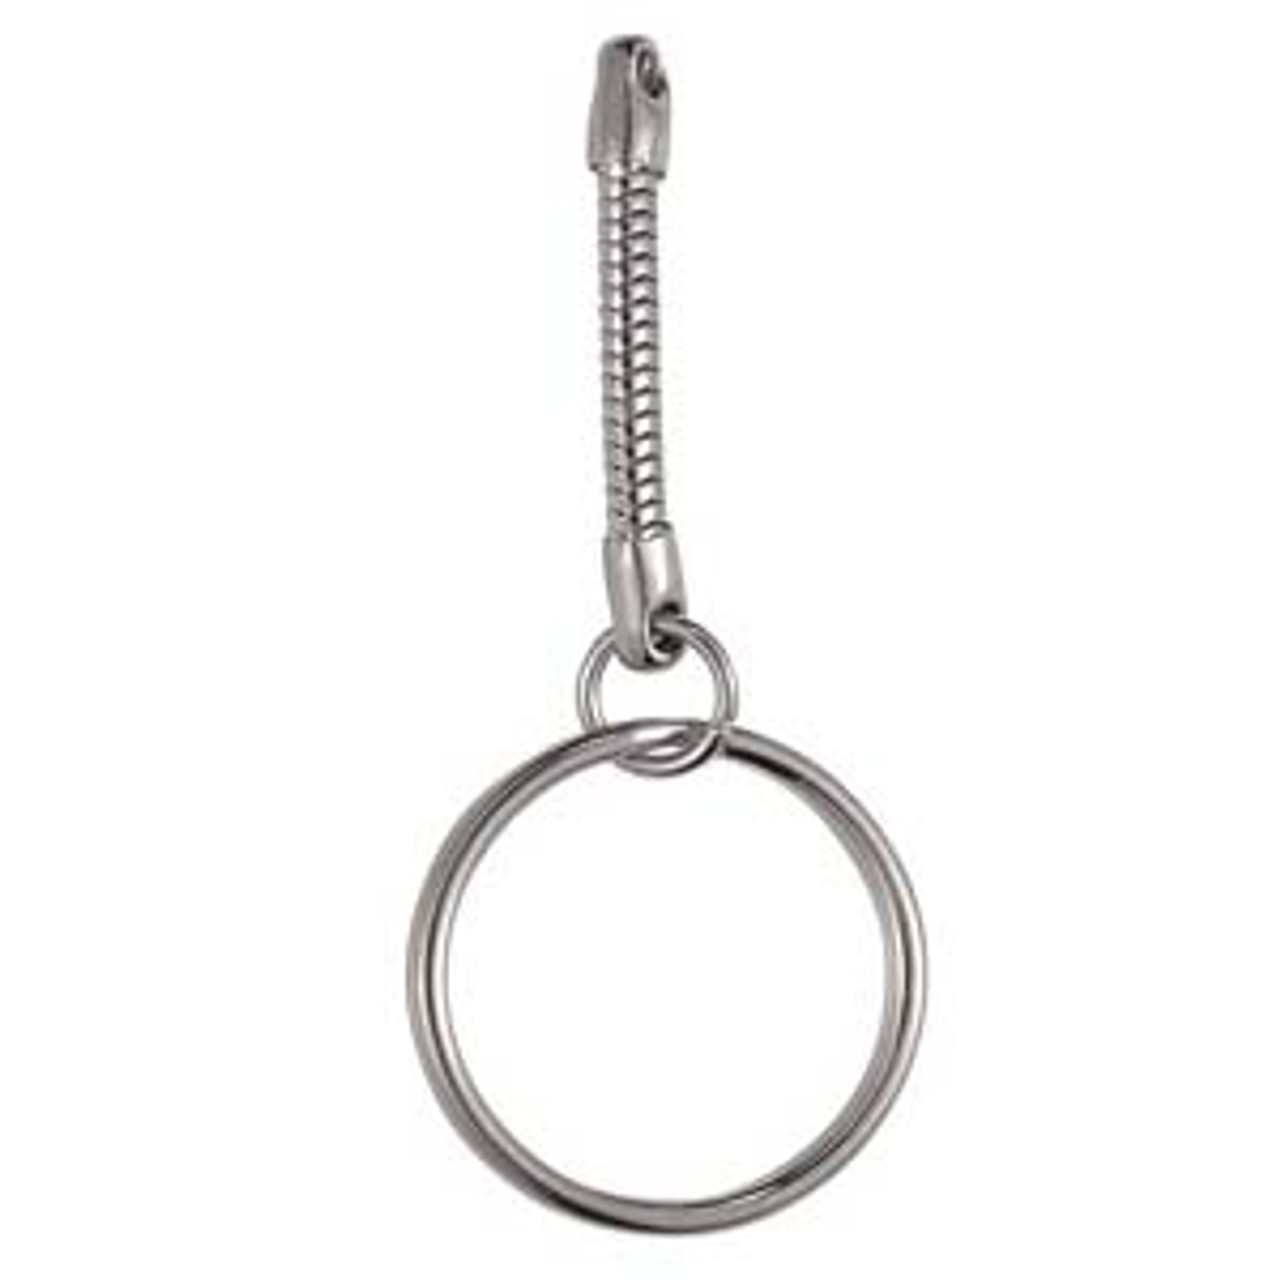 Ball Chain Manufacturing 32mm (1.25) Nickel Plated Steel Split Key Rings